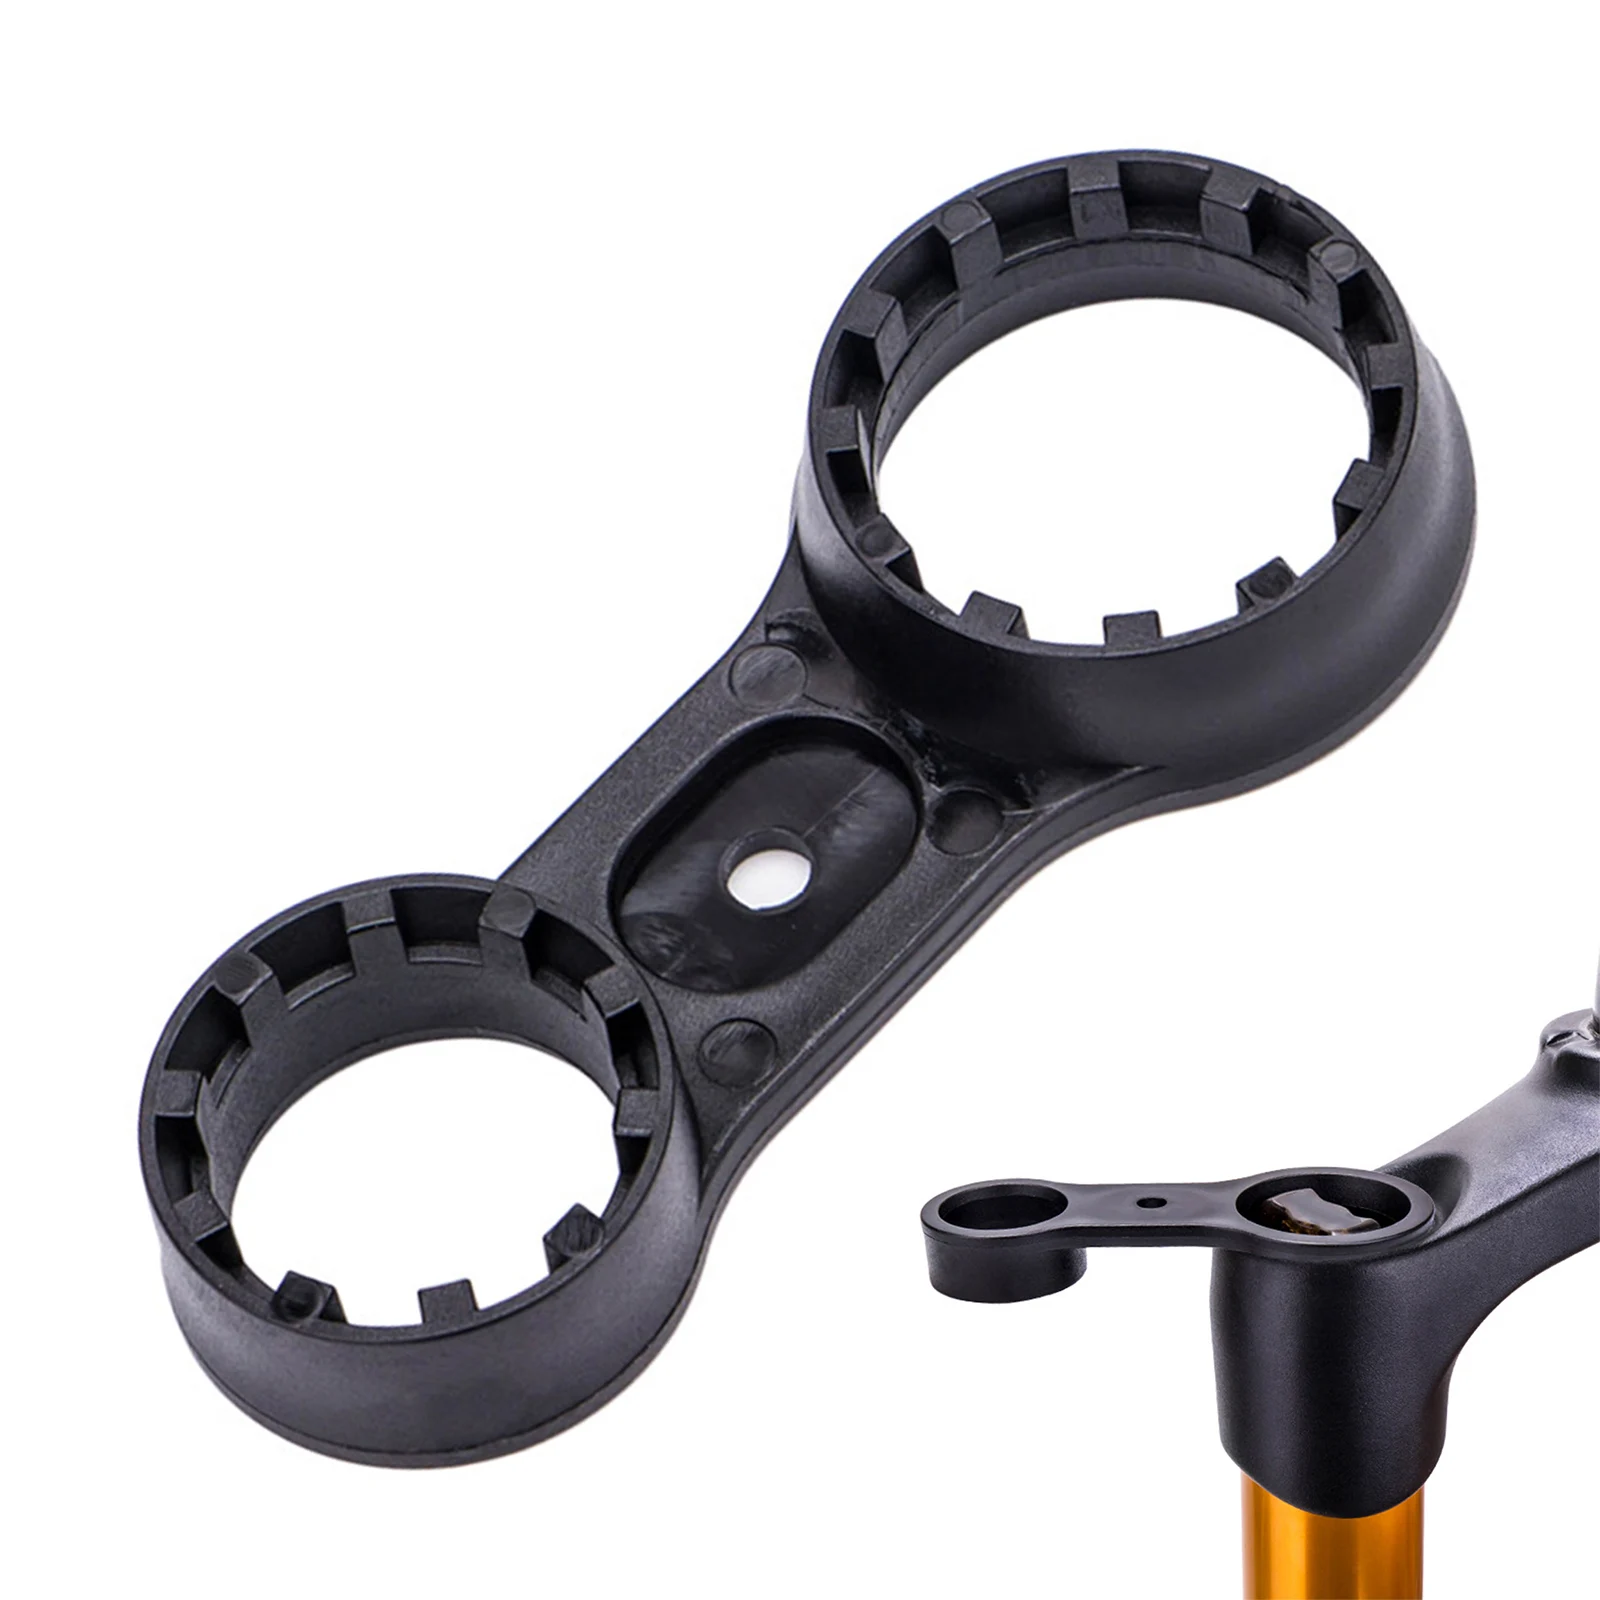 

MTB Bicycle Front Fork Cap Wrench Spanner For SR Suntour XCR/XCT/XCM/RST MTB Bikes Road Cycling Repair Disassembly Tools